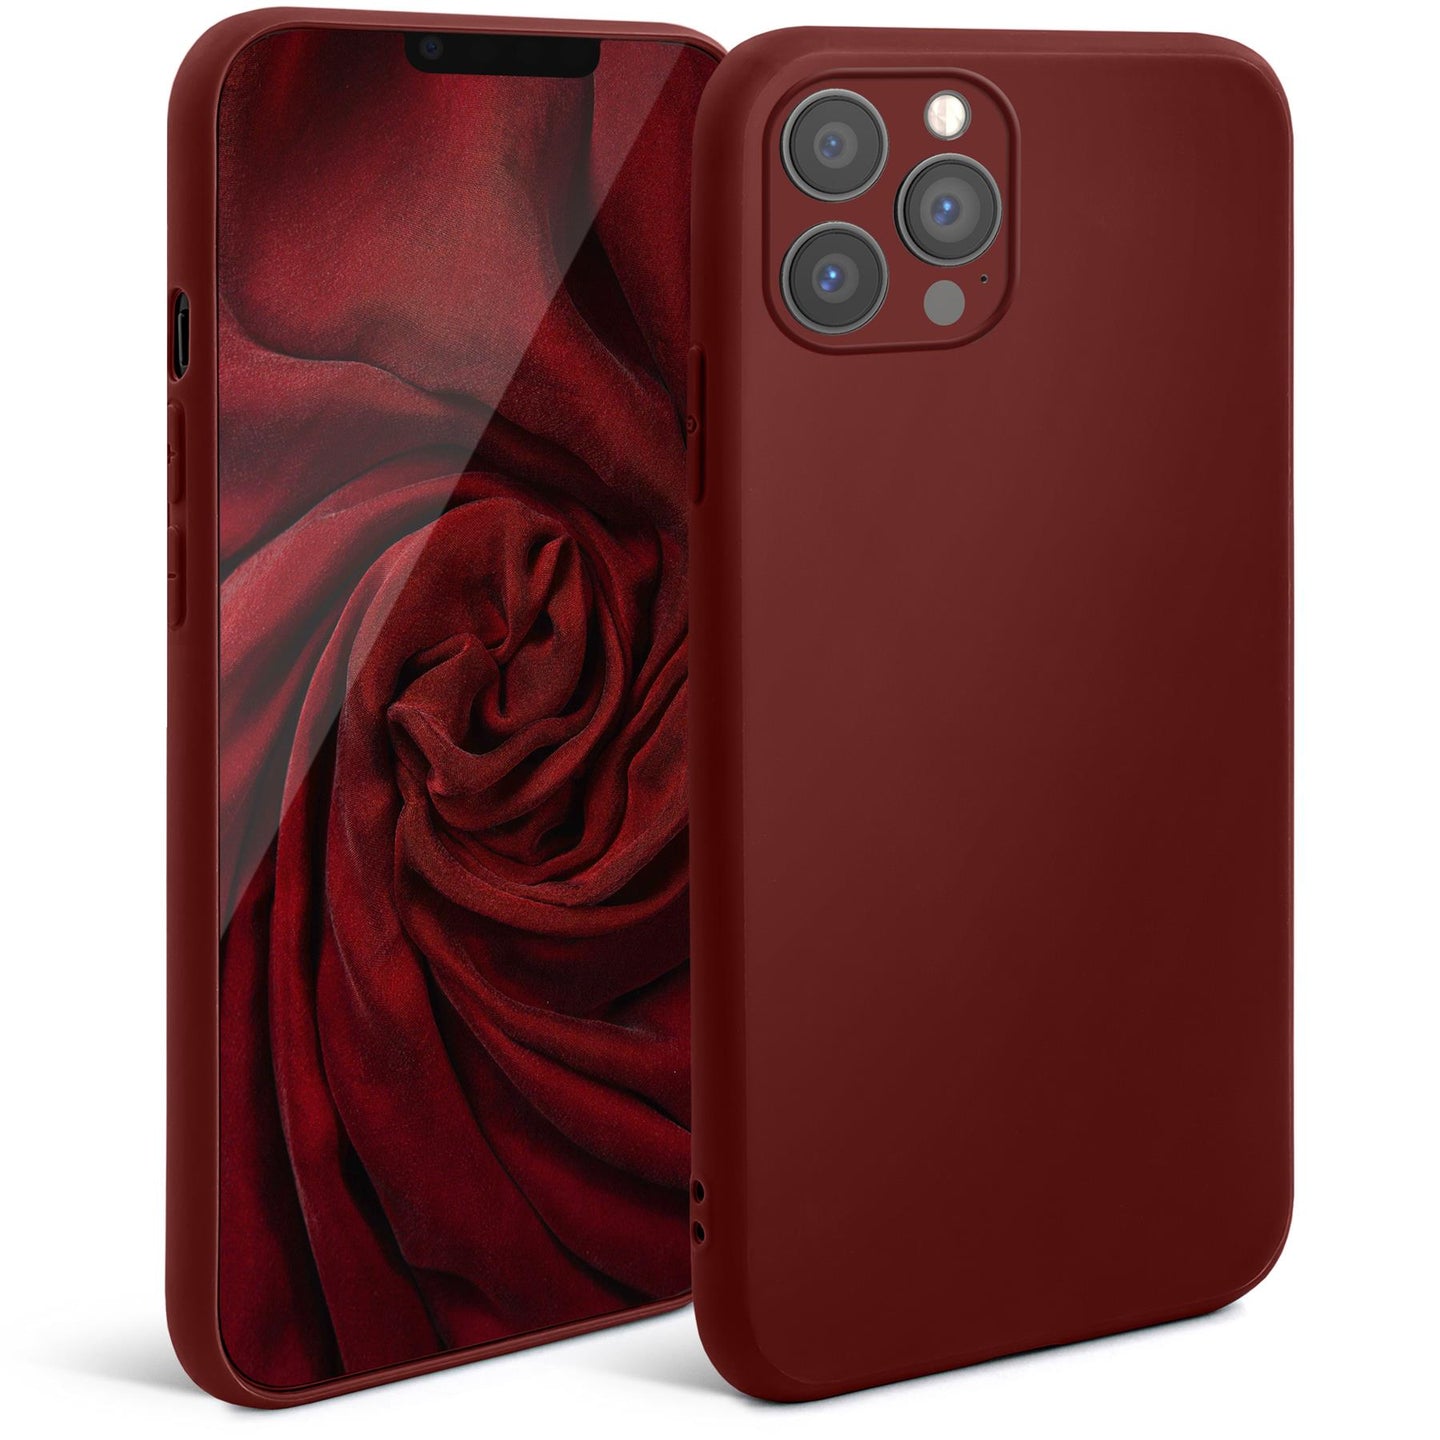 Moozy Minimalist Series Silicone Case for iPhone 13 Pro, Wine Red - Matte Finish Lightweight Mobile Phone Case Slim Soft Protective